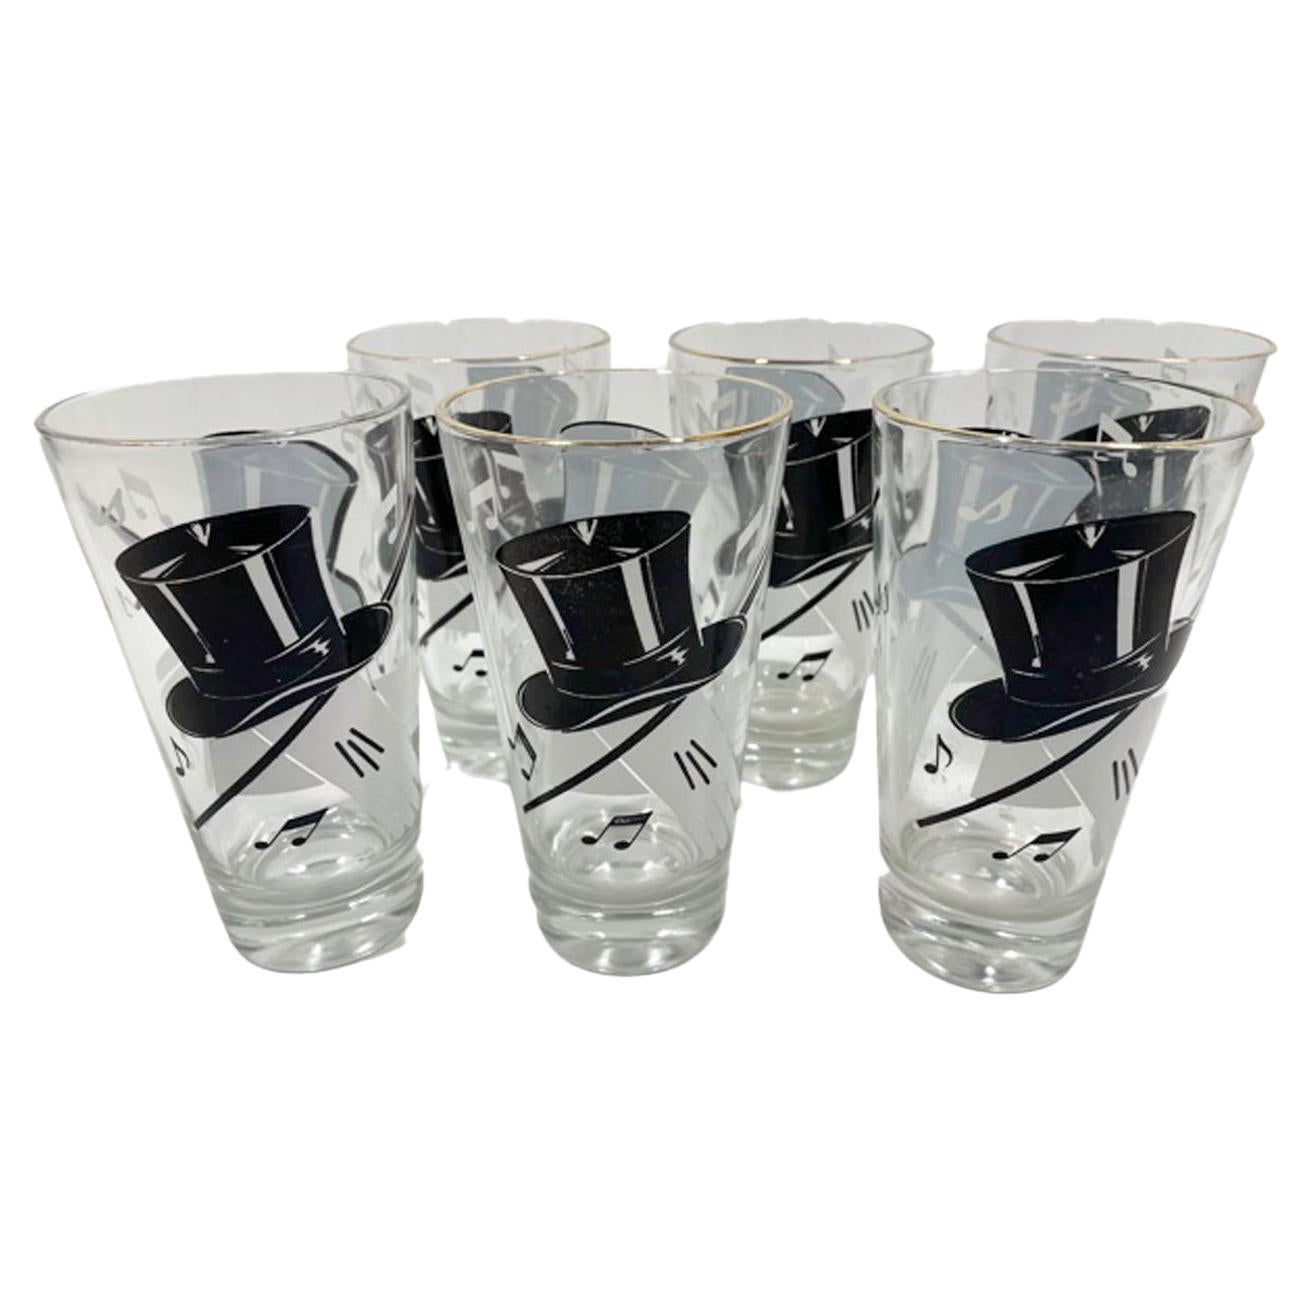 Six Vintage Highball Glasses with Top Hat, Gloves, Cane & Music Notes For Sale